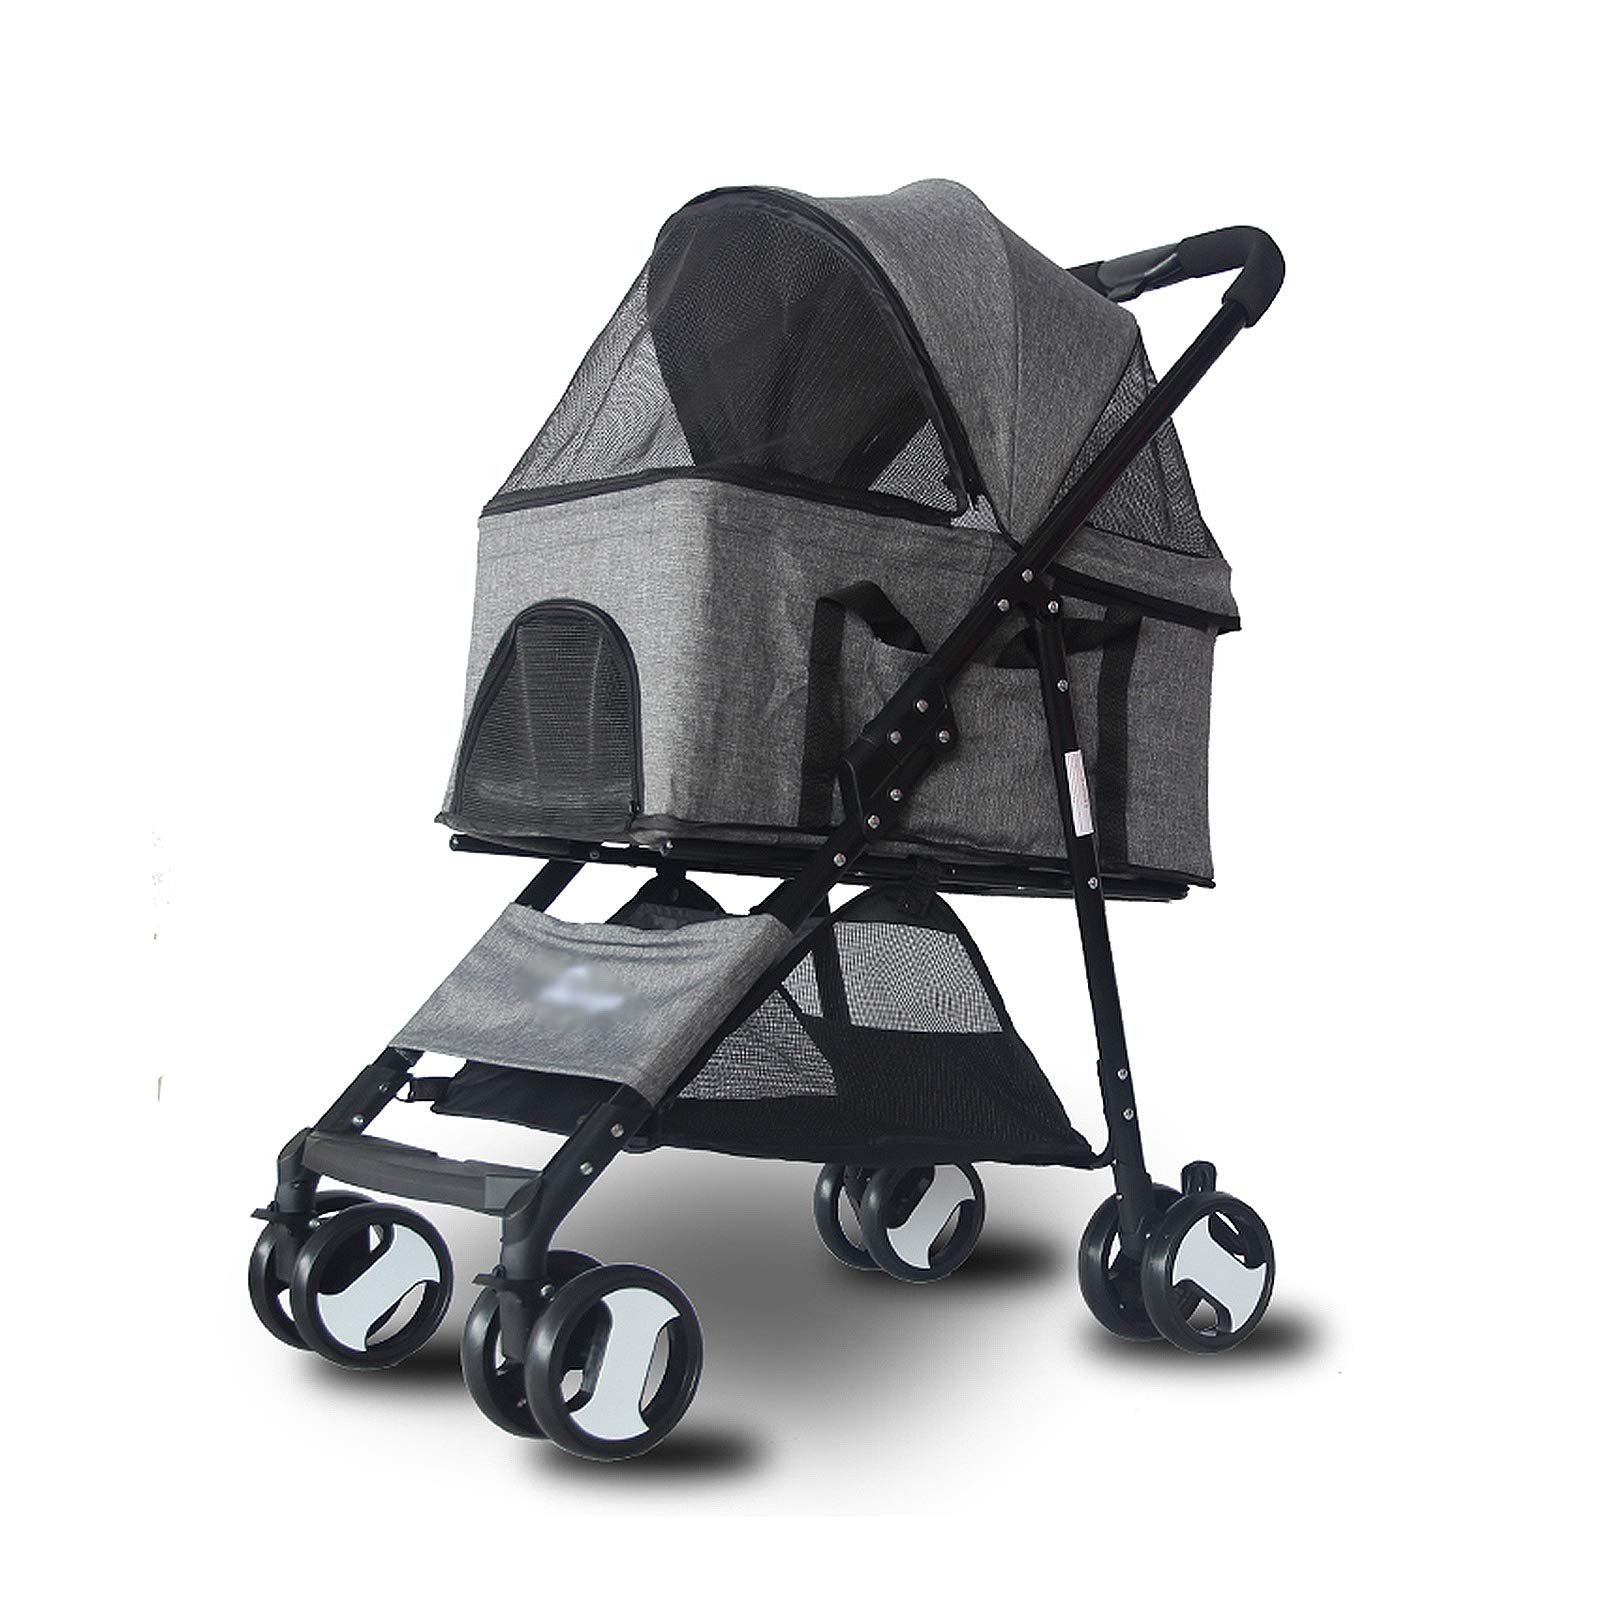 Cats Carriage Stroller in One, with Extra Large Storage Space